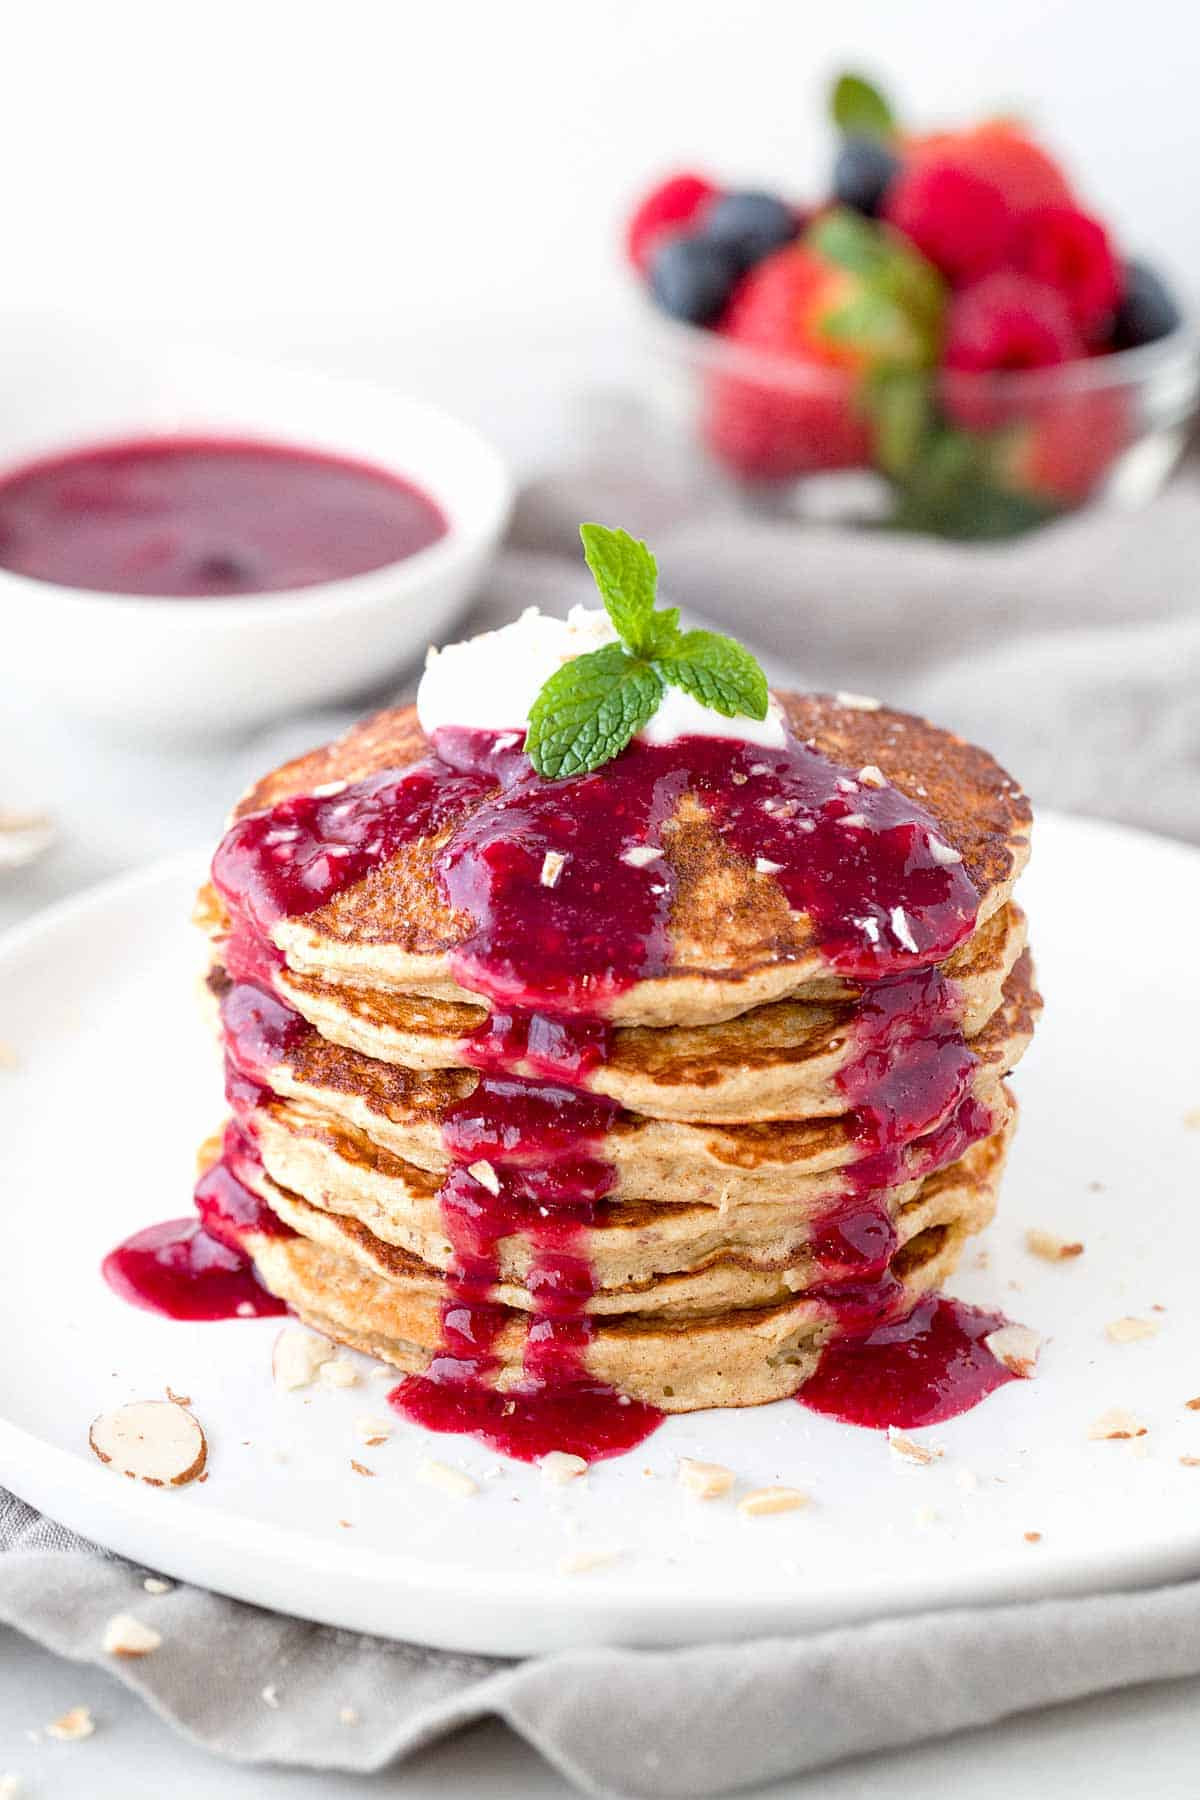 Oatmeal Pancakes Healthy
 Healthy Oat Pancakes with Berry Sauce Jessica Gavin